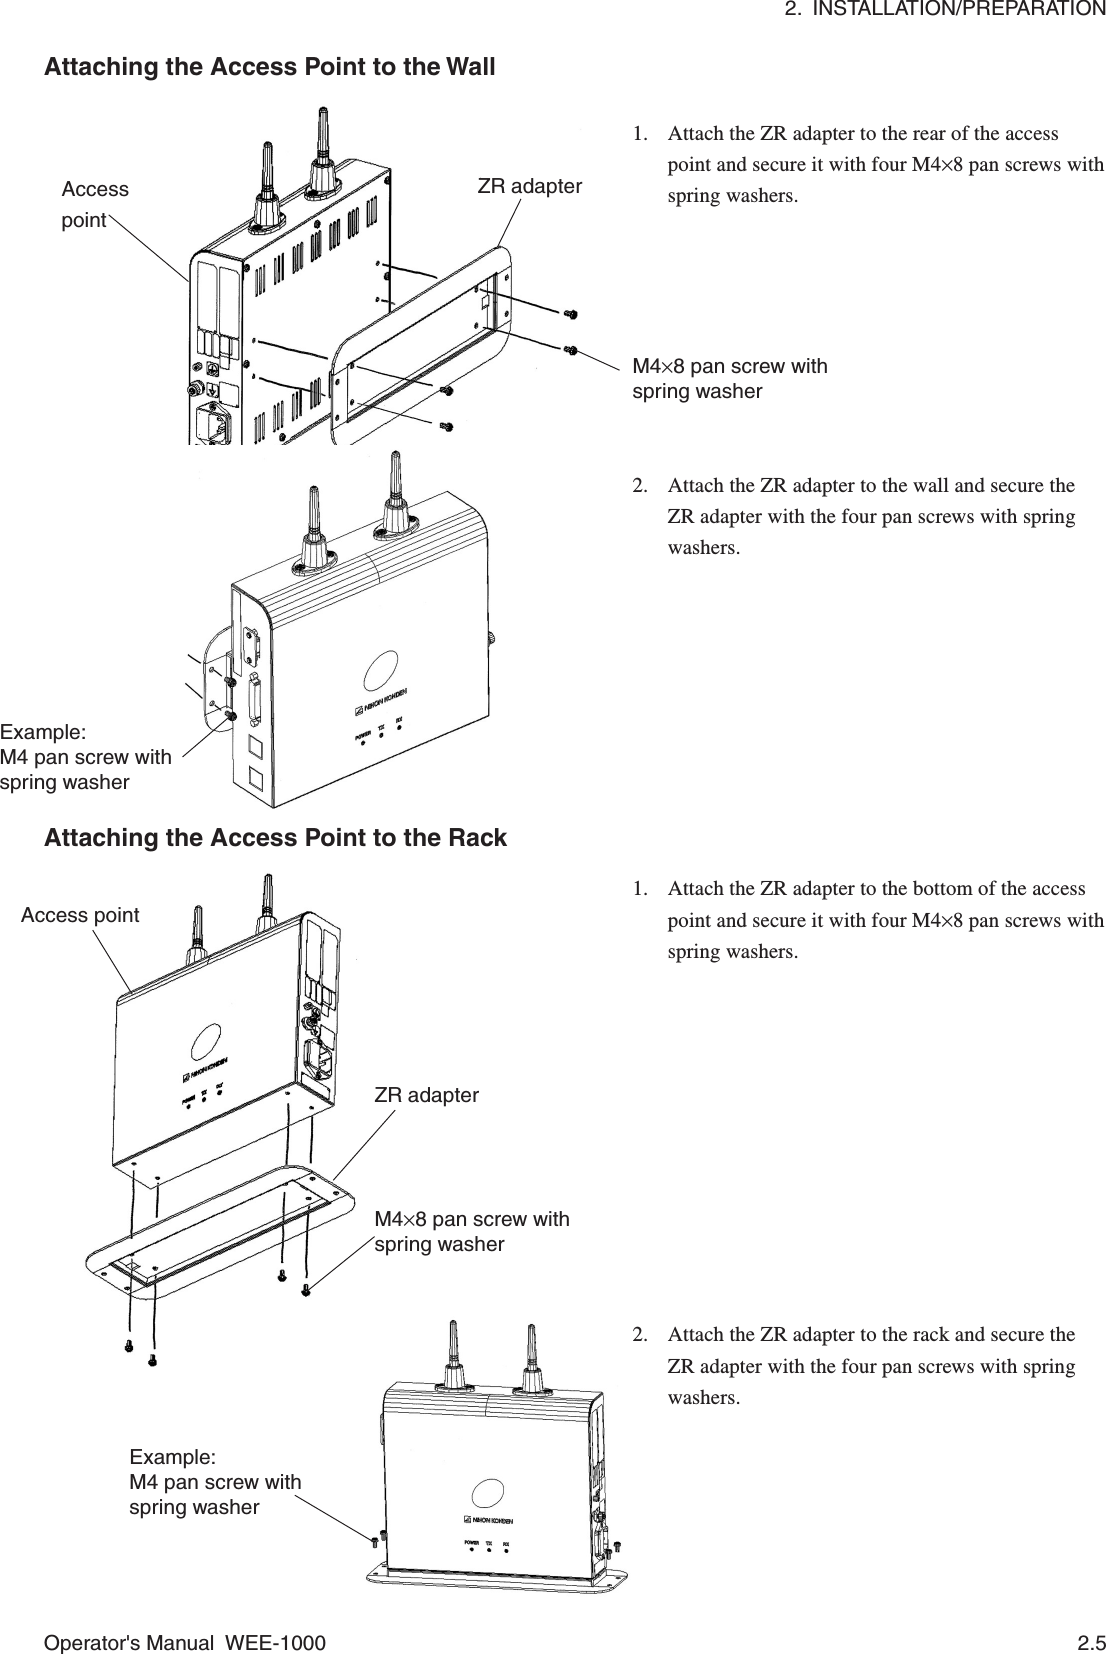 2.  INSTALLATION/PREPARATIONOperator&apos;s Manual  WEE-1000 2.51. Attach the ZR adapter to the rear of the accesspoint and secure it with four M4×8 pan screws withspring washers.Attaching the Access Point to the Wall1. Attach the ZR adapter to the bottom of the accesspoint and secure it with four M4×8 pan screws withspring washers.Attaching the Access Point to the Rack2. Attach the ZR adapter to the rack and secure theZR adapter with the four pan screws with springwashers.2. Attach the ZR adapter to the wall and secure theZR adapter with the four pan screws with springwashers.AccesspointZR adapterM4×8 pan screw withspring washerExample:M4 pan screw withspring washerAccess pointZR adapterM4×8 pan screw withspring washerExample:M4 pan screw withspring washer